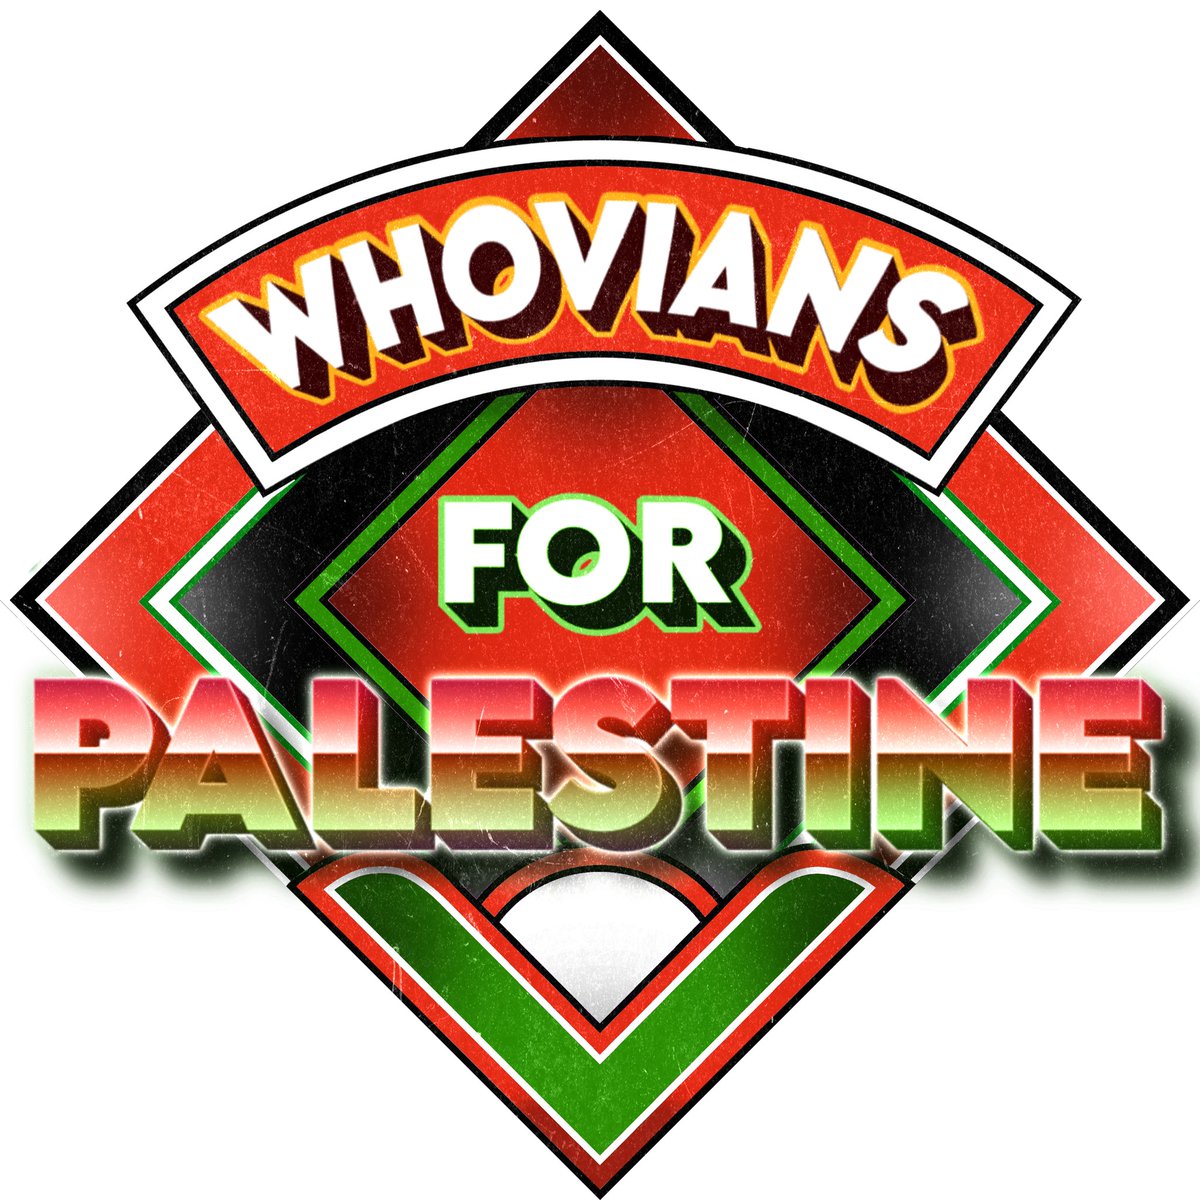 Inspired by Creators For Palestine, I’m putting together a charity livestream project called Whovians For Palestine. 

Over the next few weeks I’ll be asking more people to get involved and all donations will go towards Palestine. 

Message me if you want to get involved 🍉